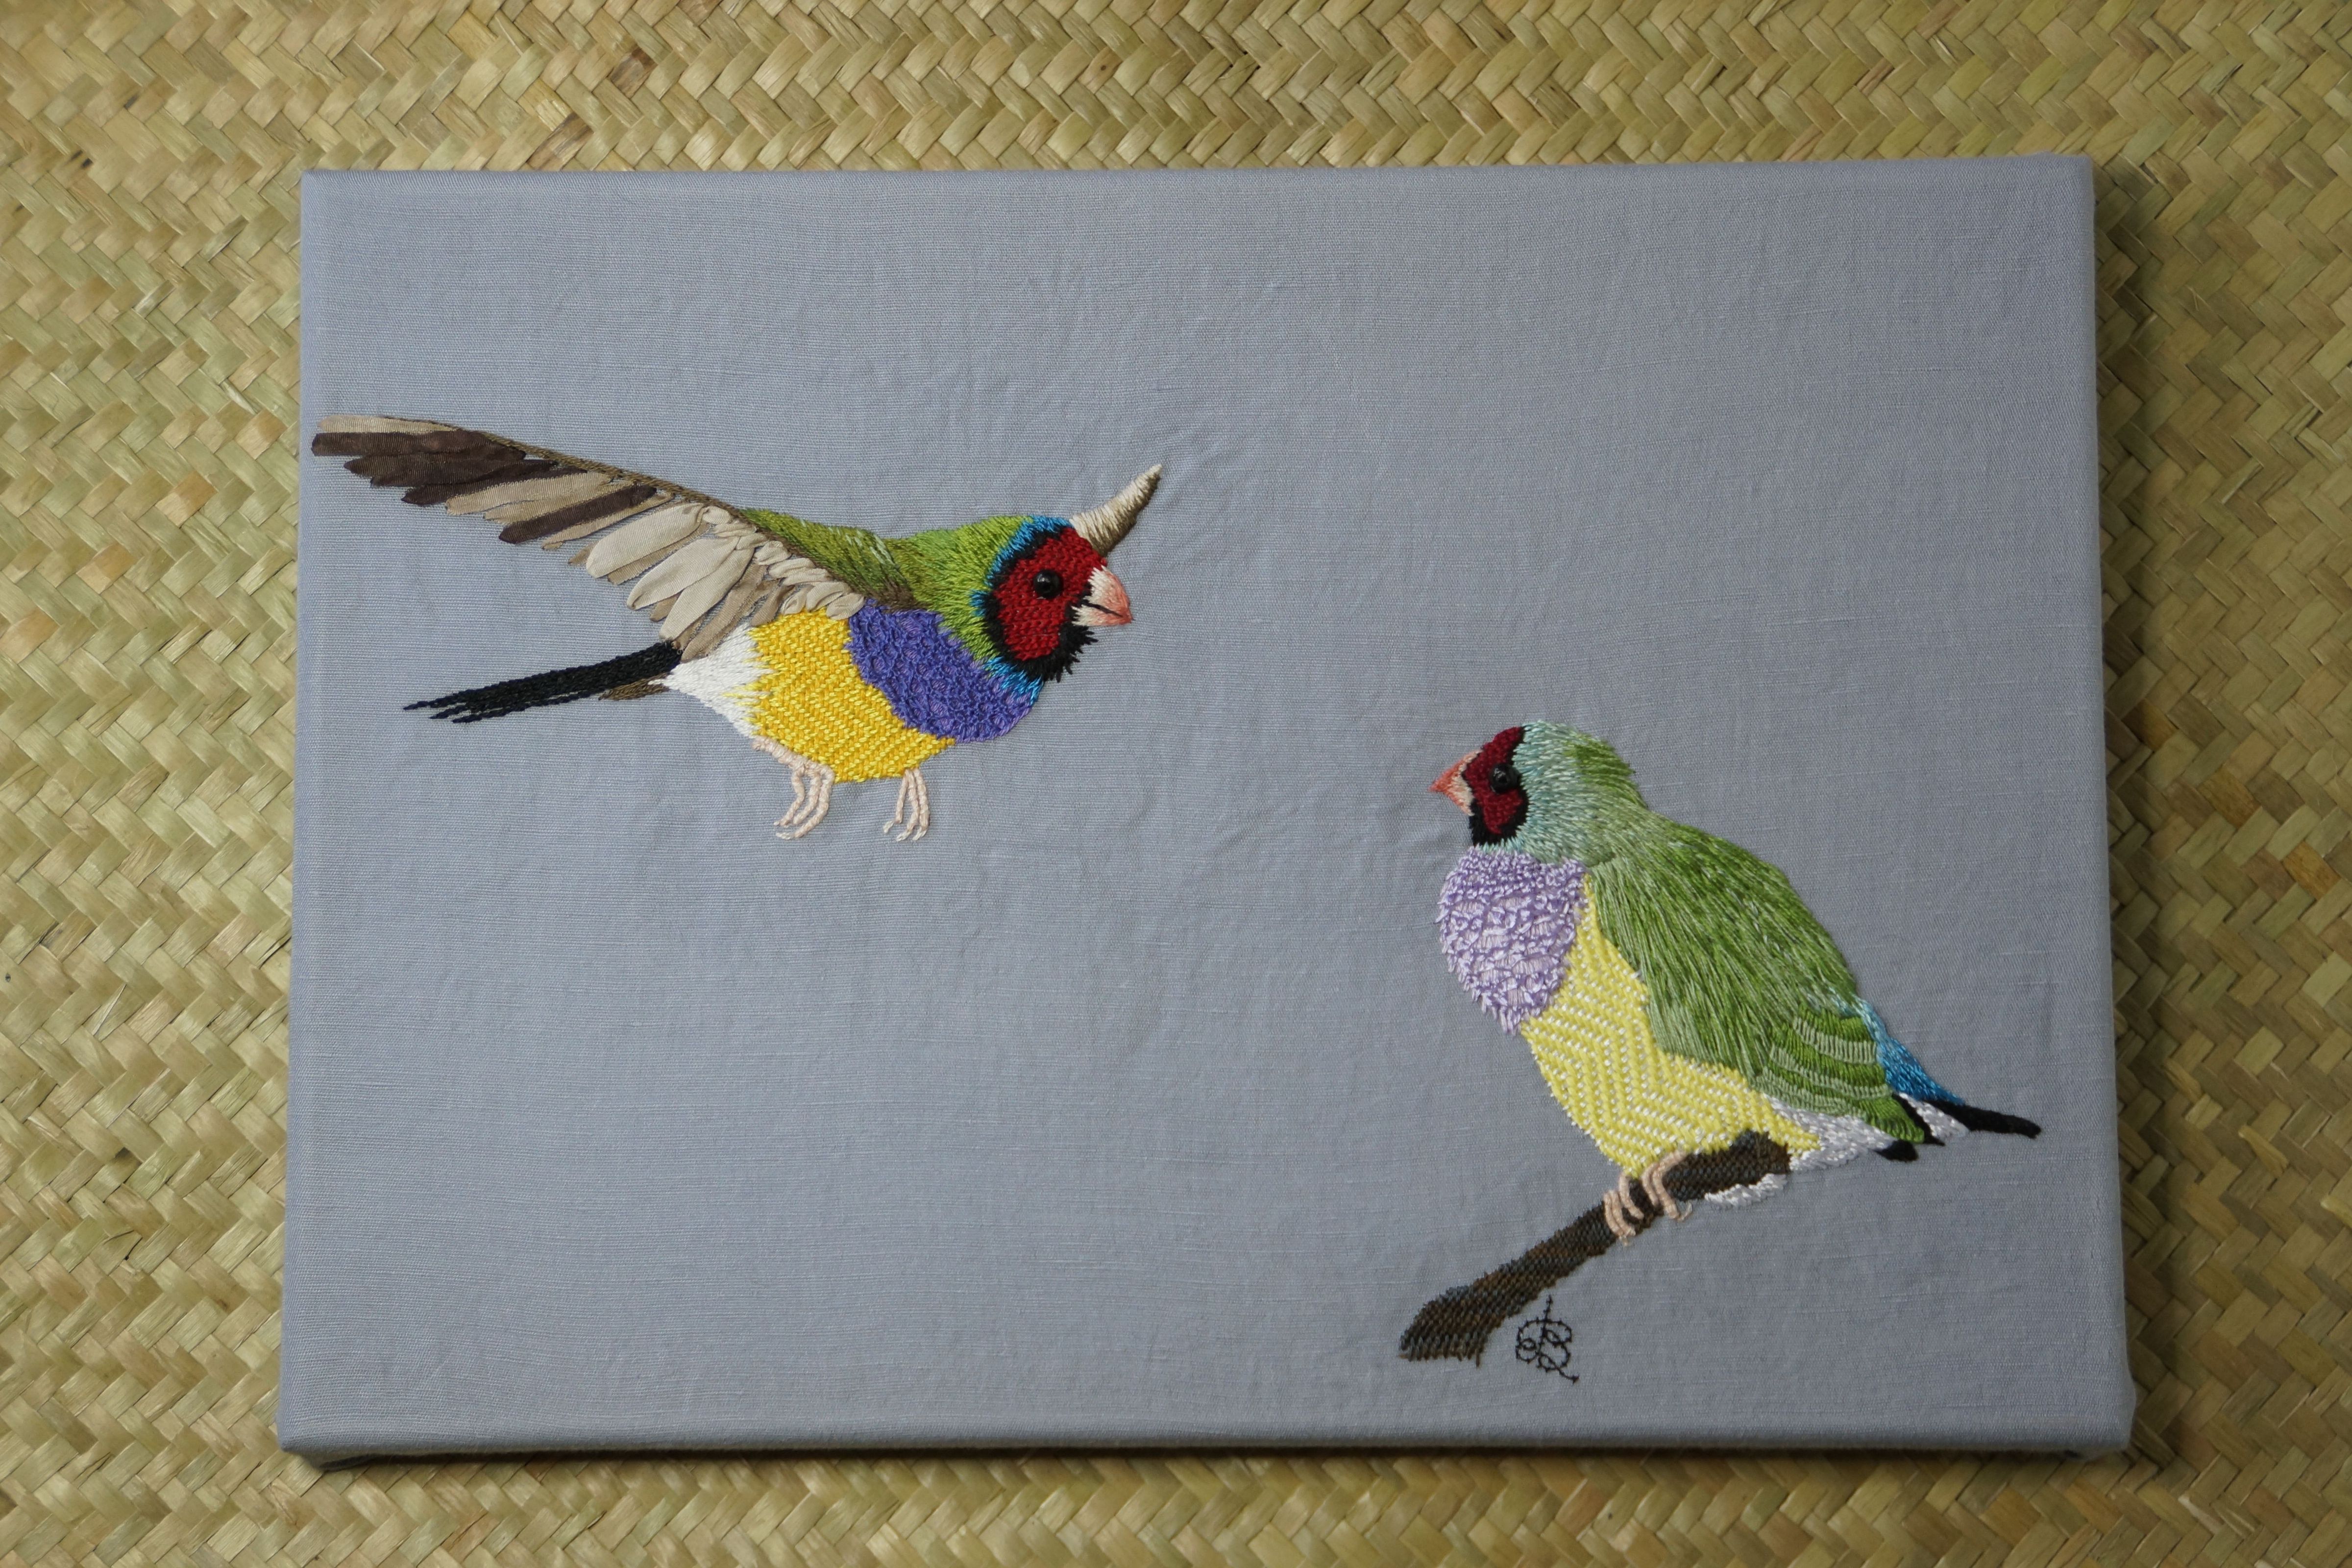 &lsquo;Mr. and Mrs. Gouldian Finch&rsquo; Original Embroidery